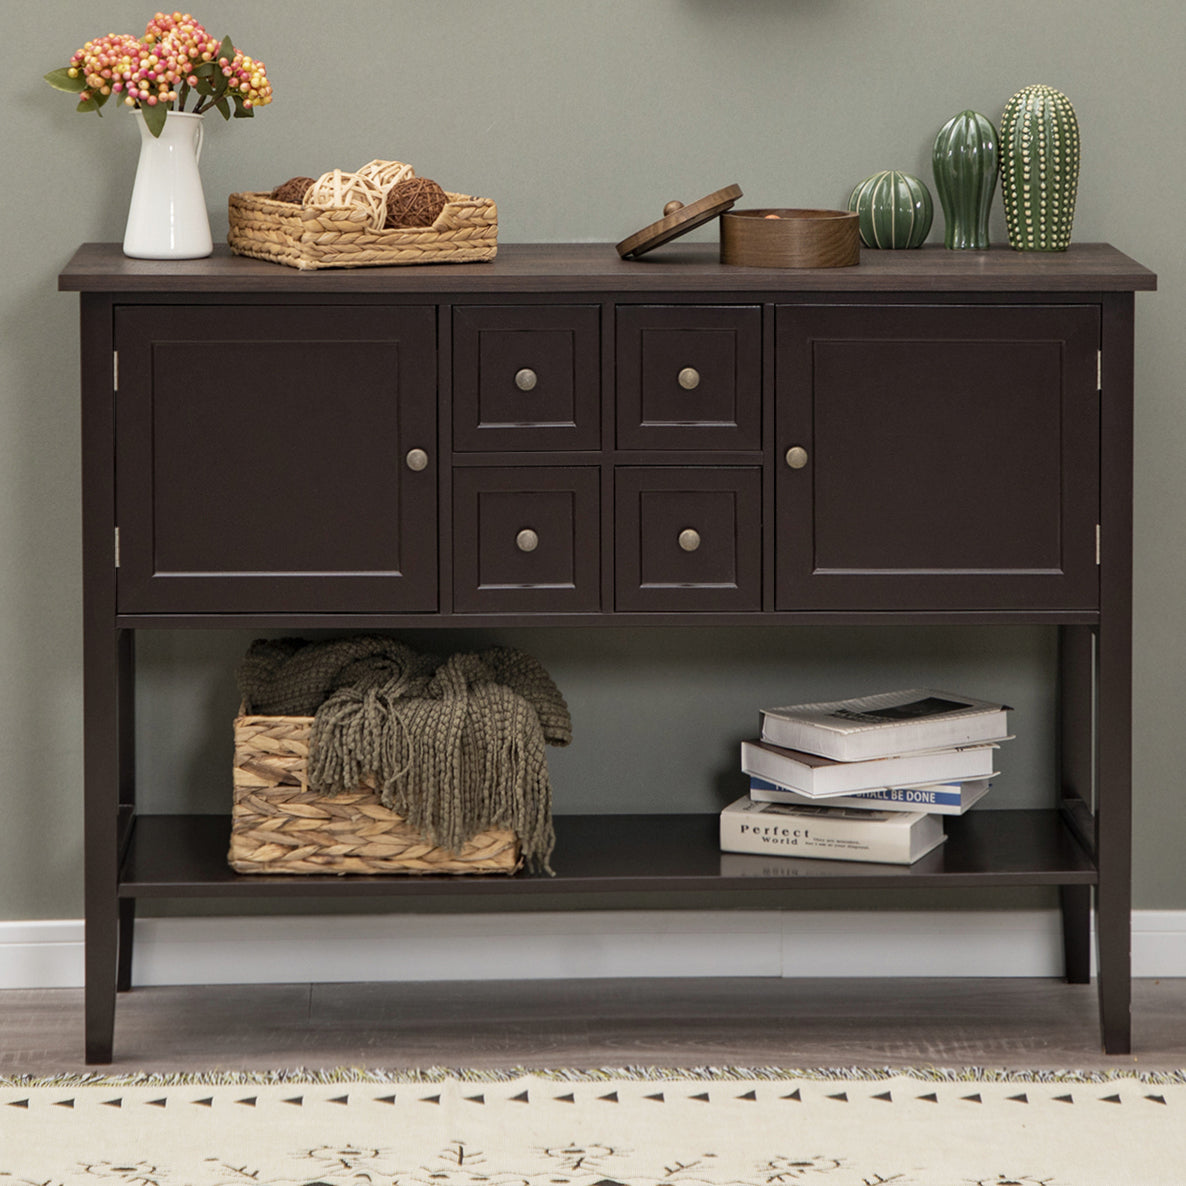 This console table offers an elegant design with abundant storage, featuring 4 drawers, 2 cabinets, a bottom shelf, and a spacious tabletop.